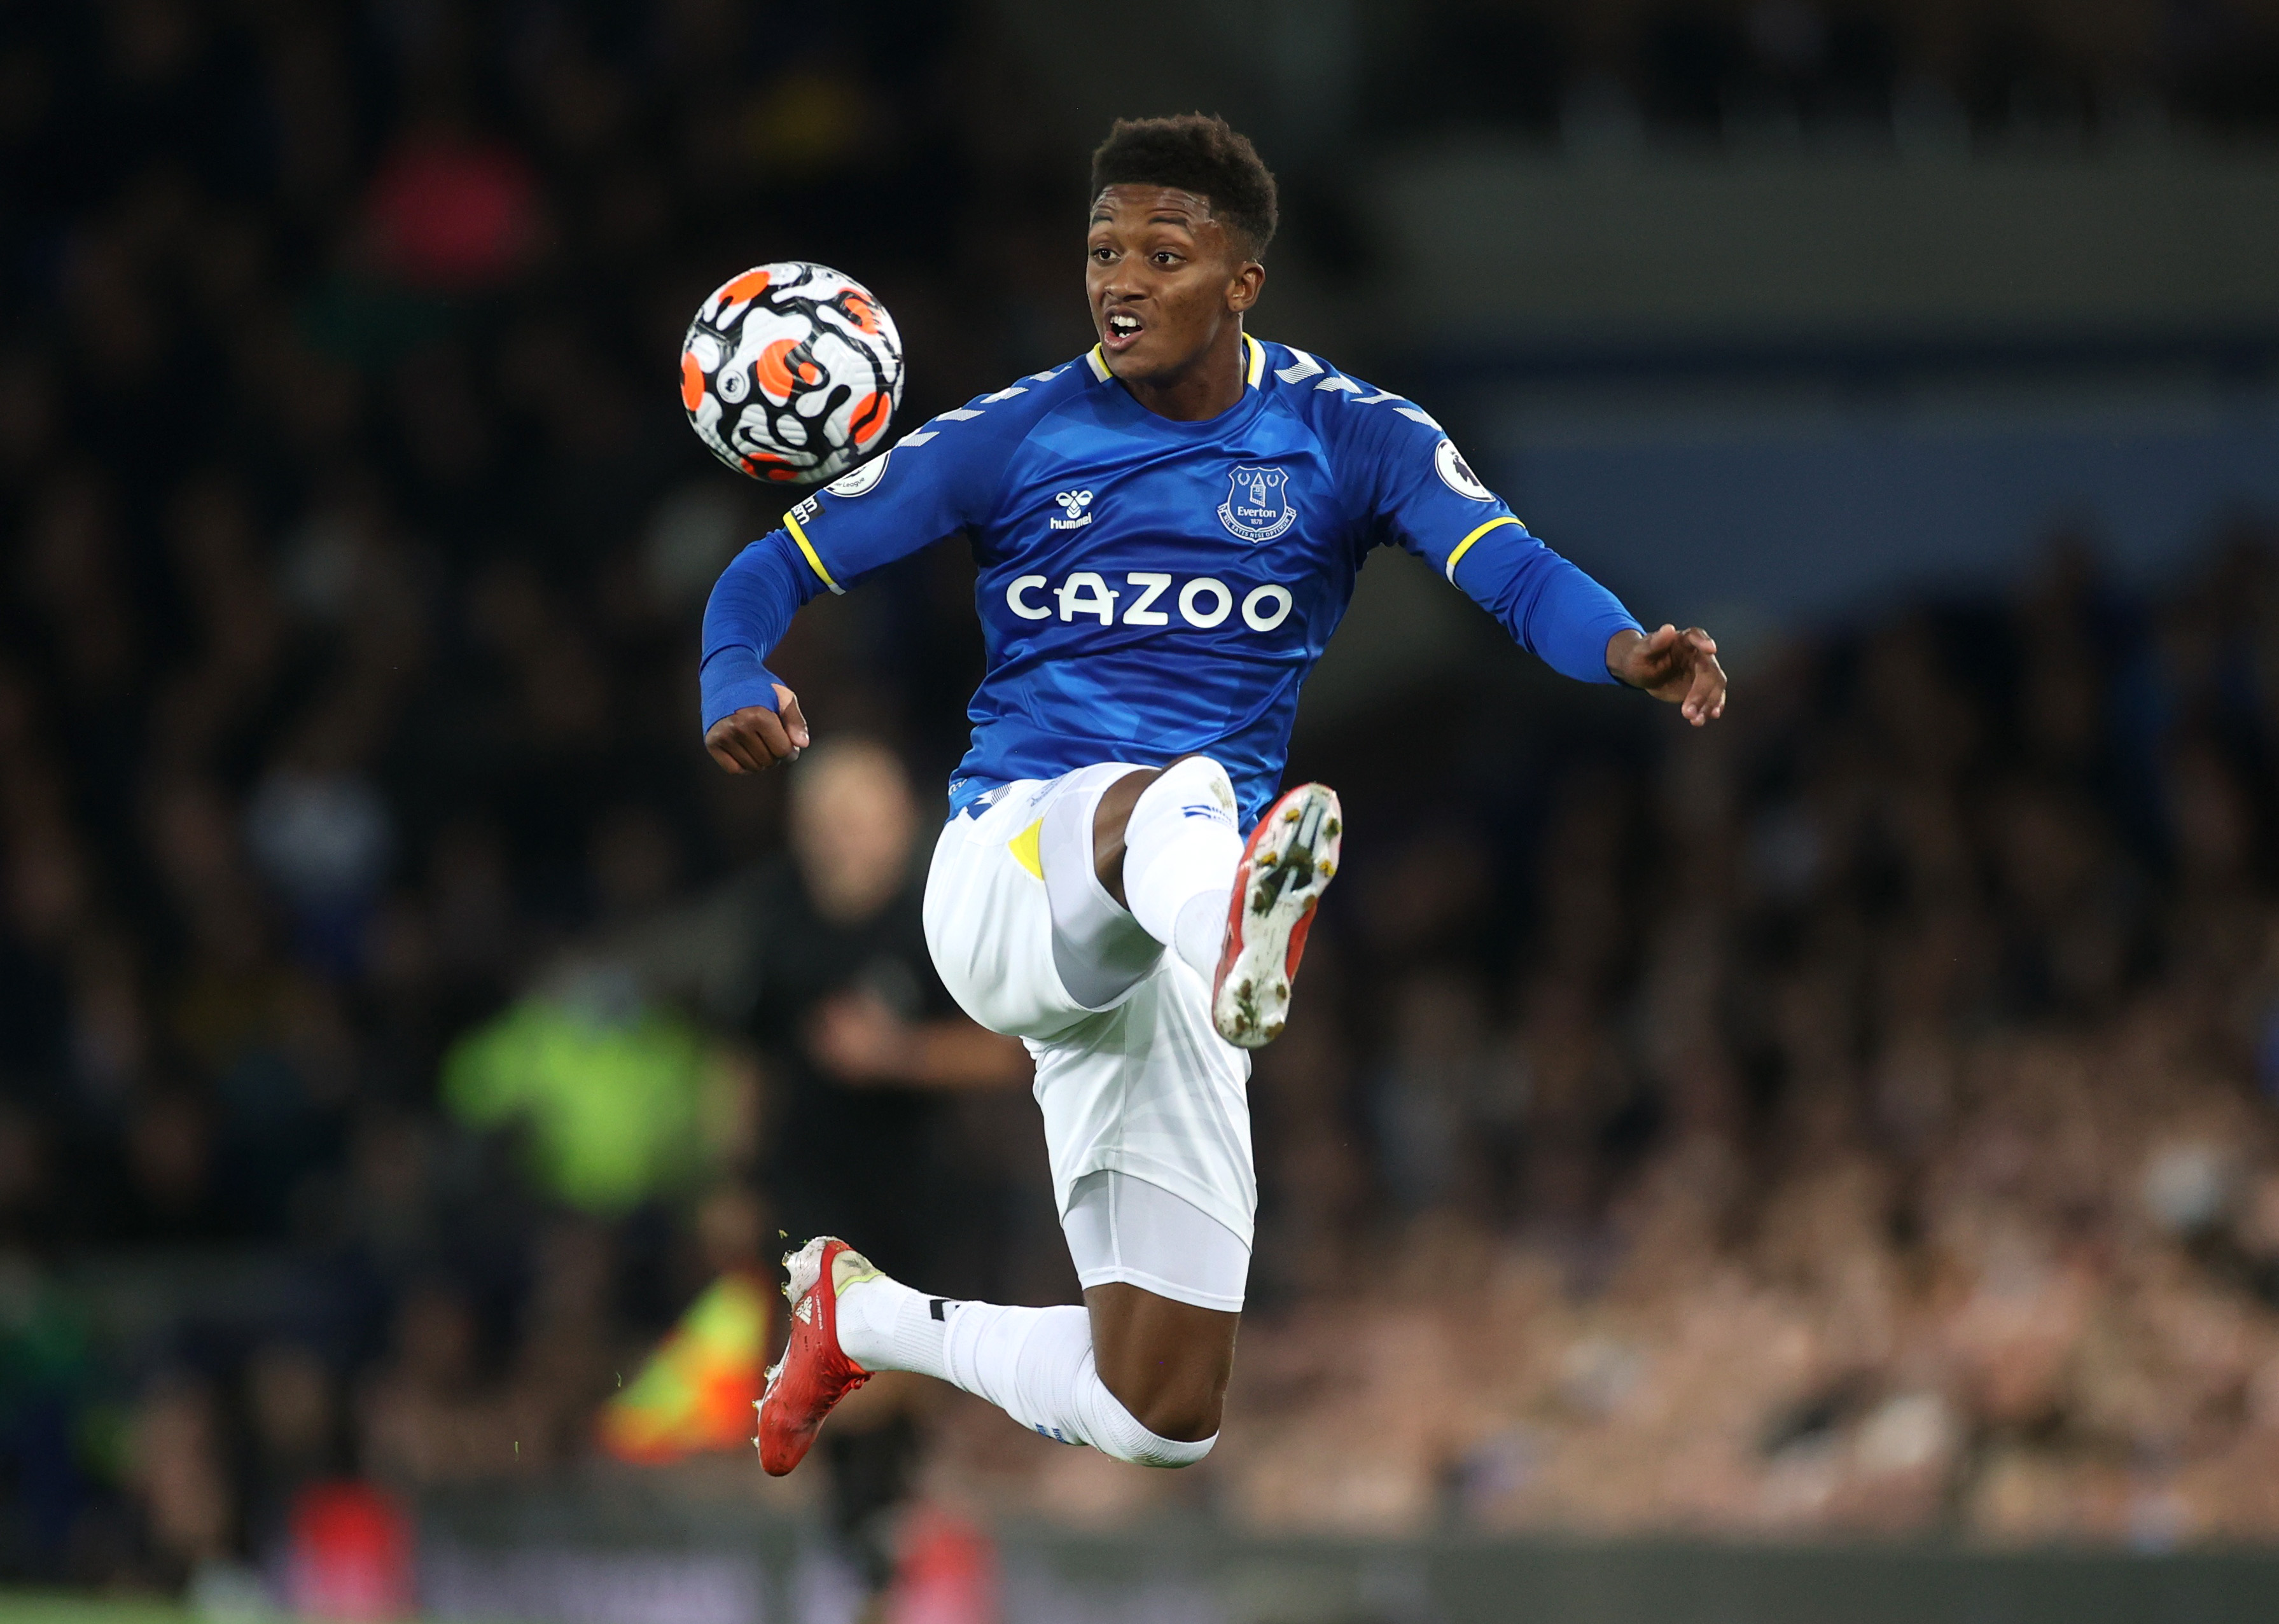 Fantasy Premier League you think Demarai Gray will add to his two #PL goals this season in the second half?